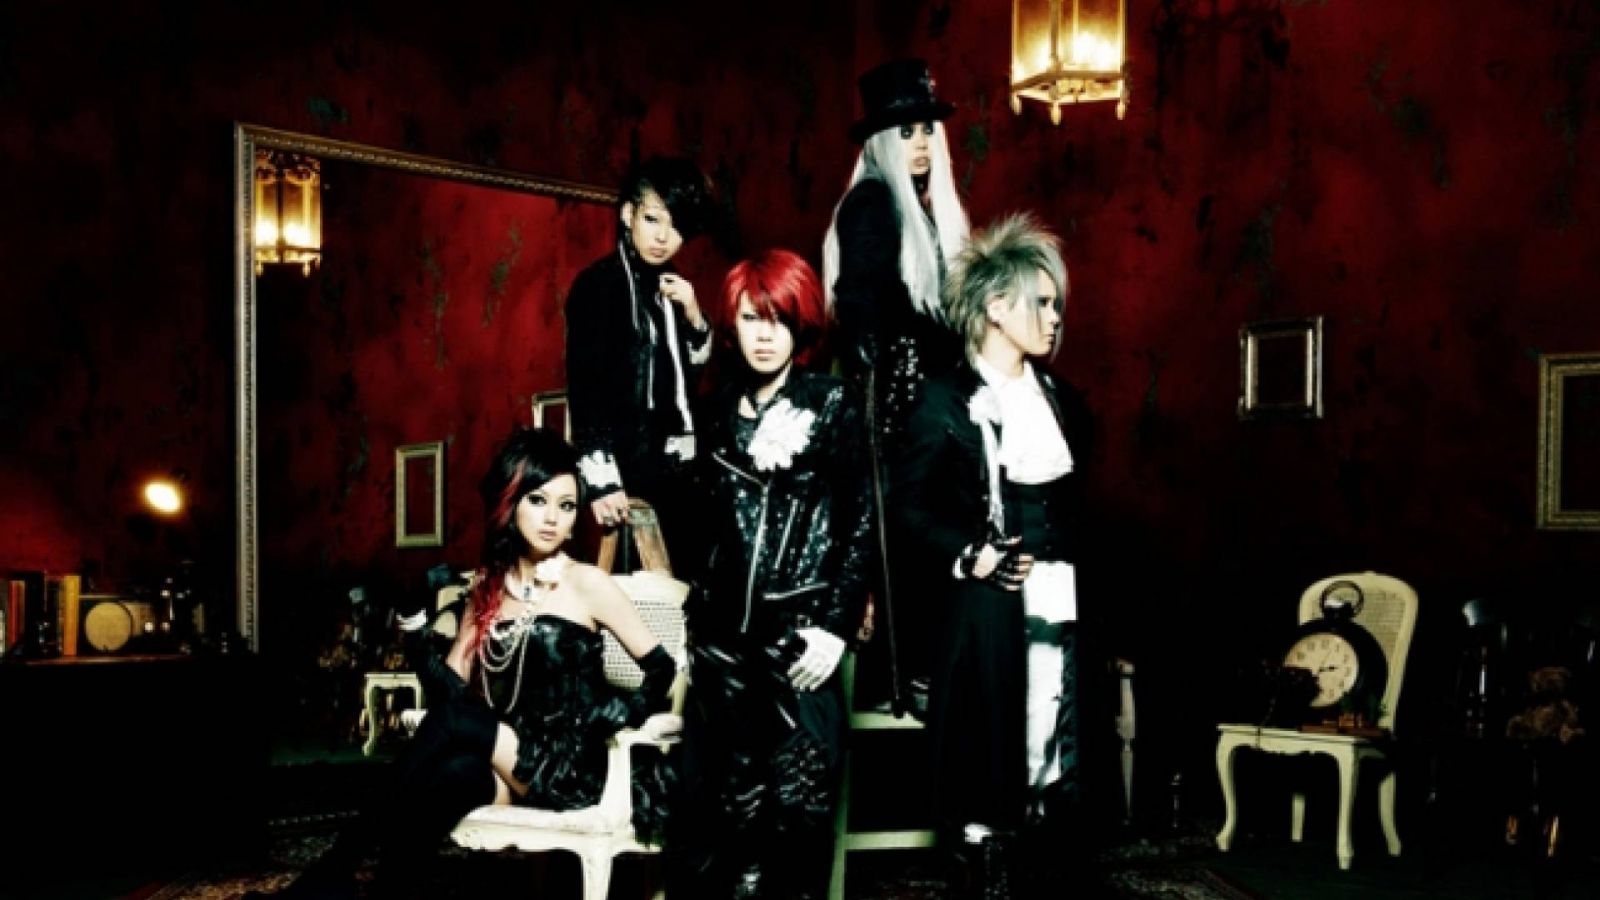 exist†trace to Perform at A-Kon 24 © Monster's Inc.